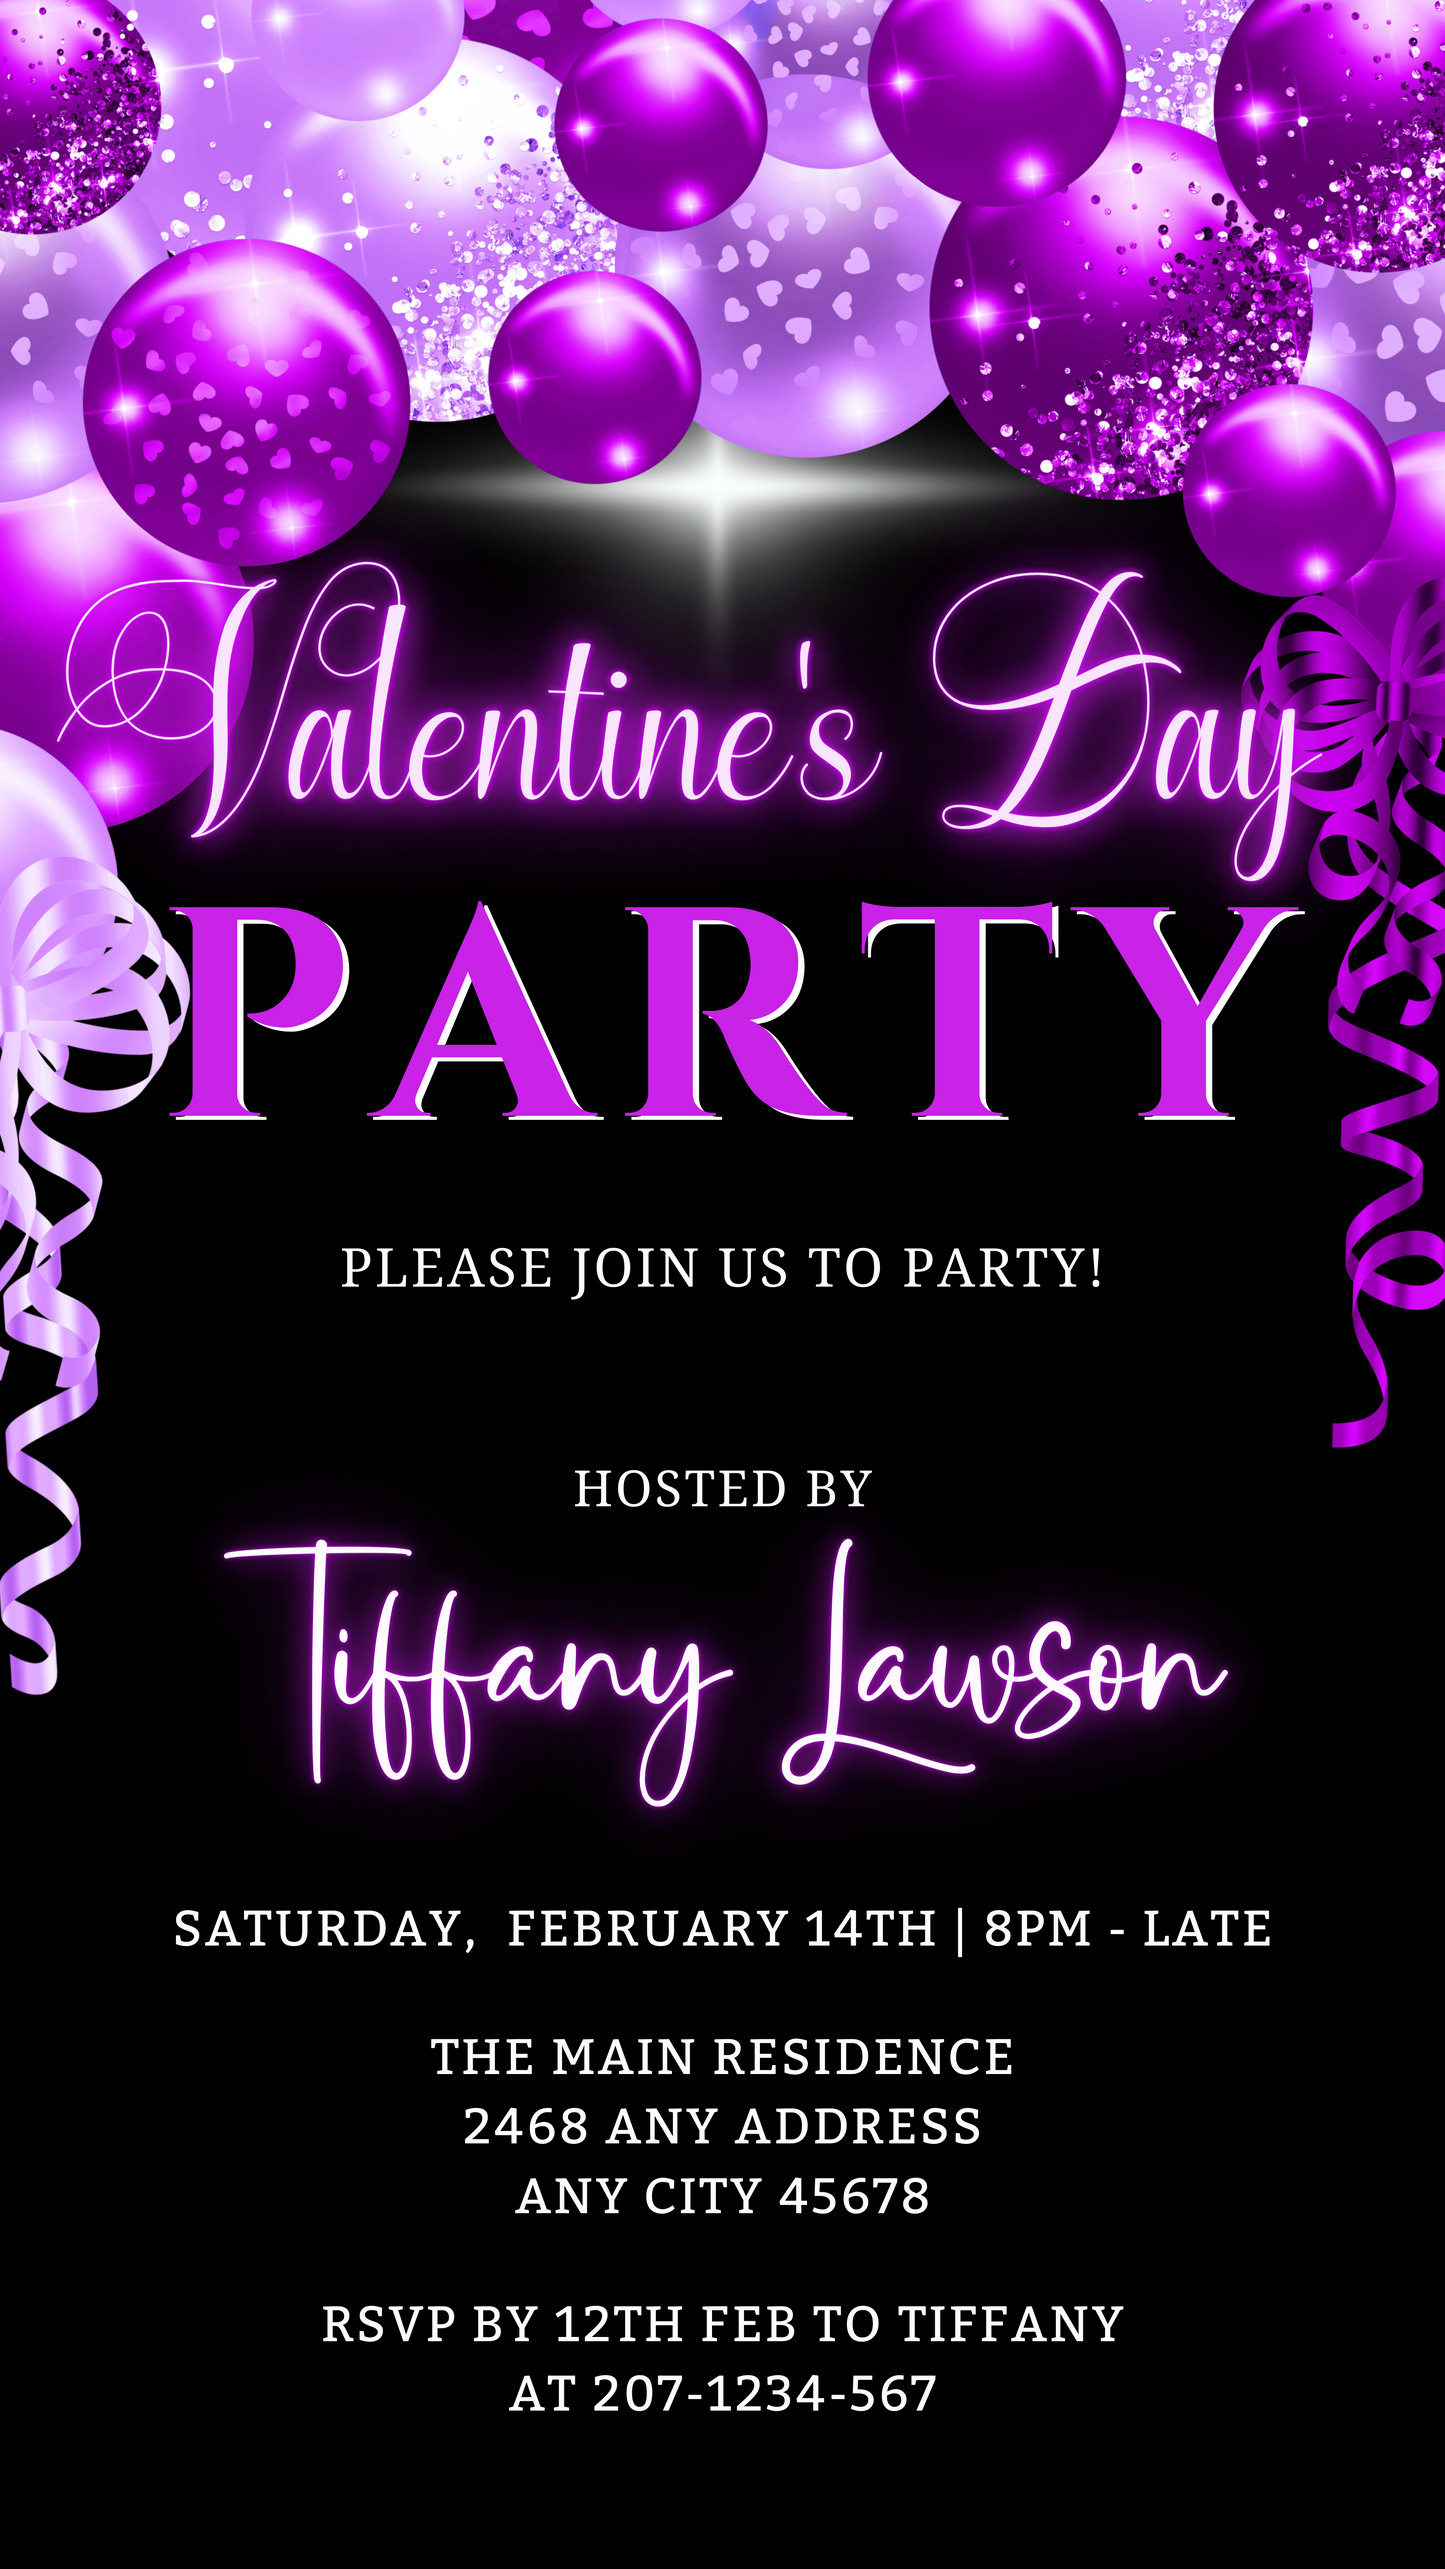 Editable Neon Purple Balloons Valentine's Party Evite, featuring heart and sparkle designs, customizable via Canva for digital sharing through text or email.